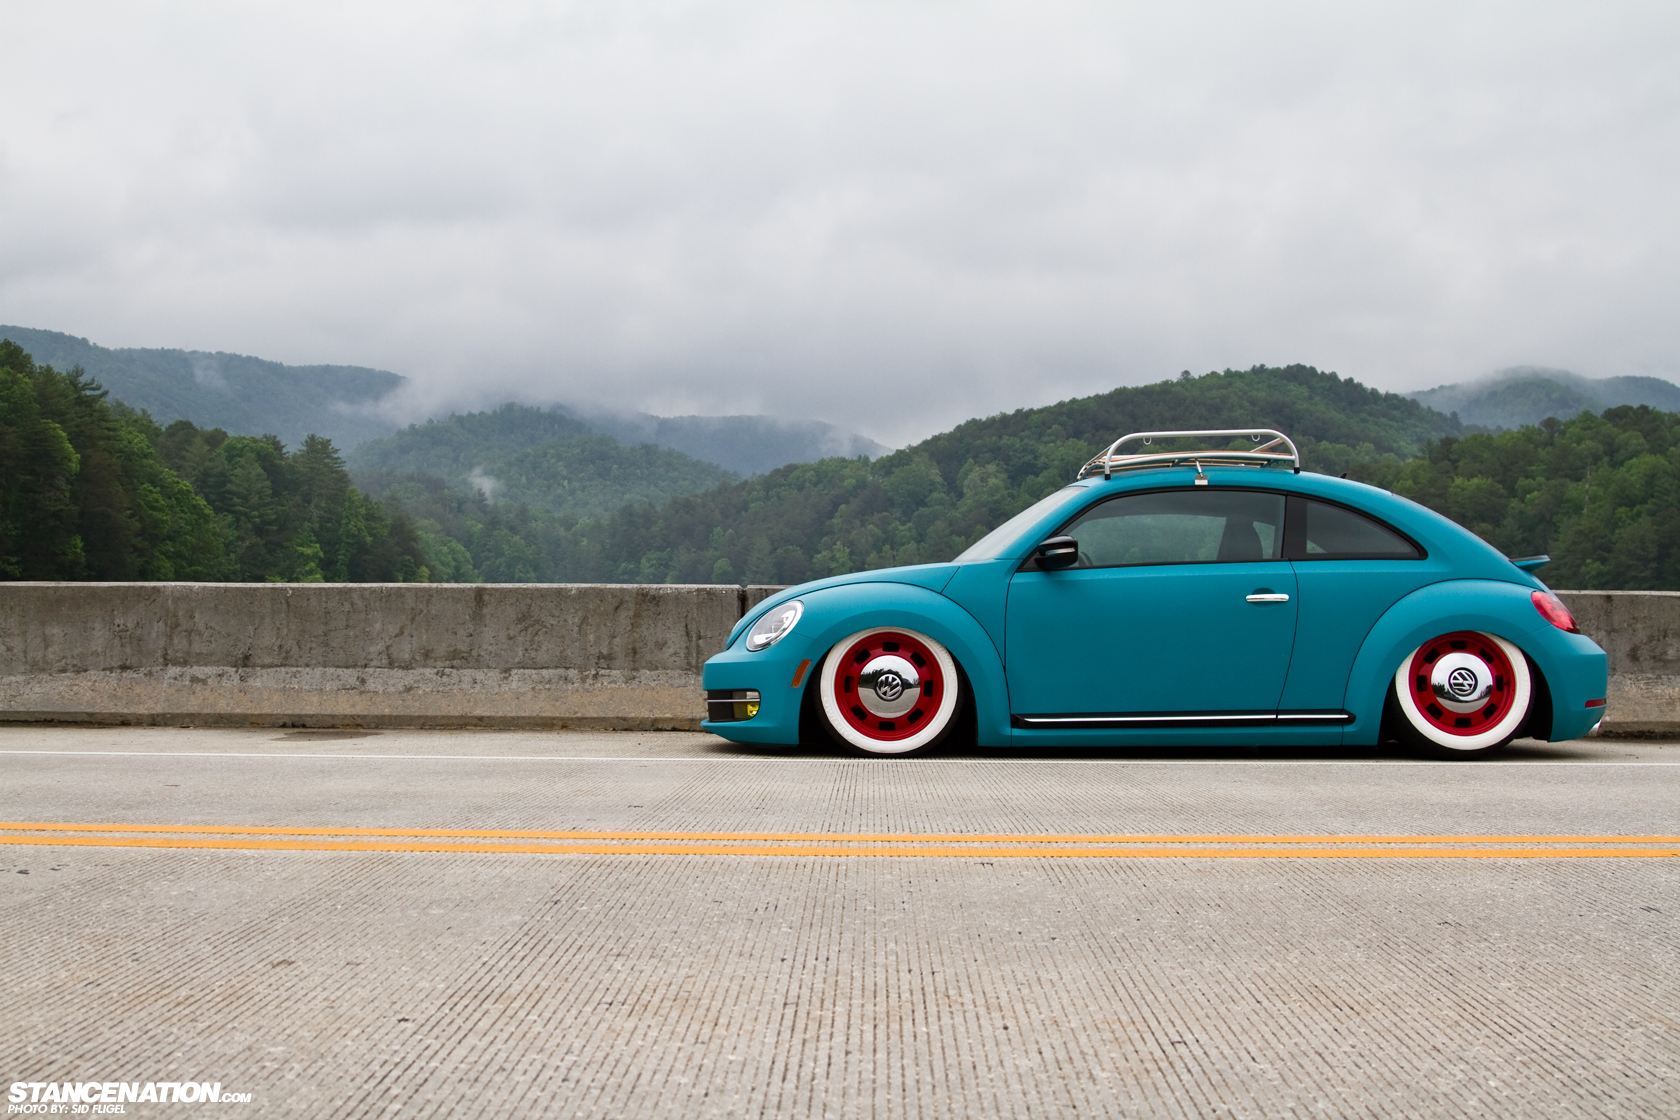 Can VW's New Beetle shed boomer nostalgia to win younger hearts? - Hagerty  Media